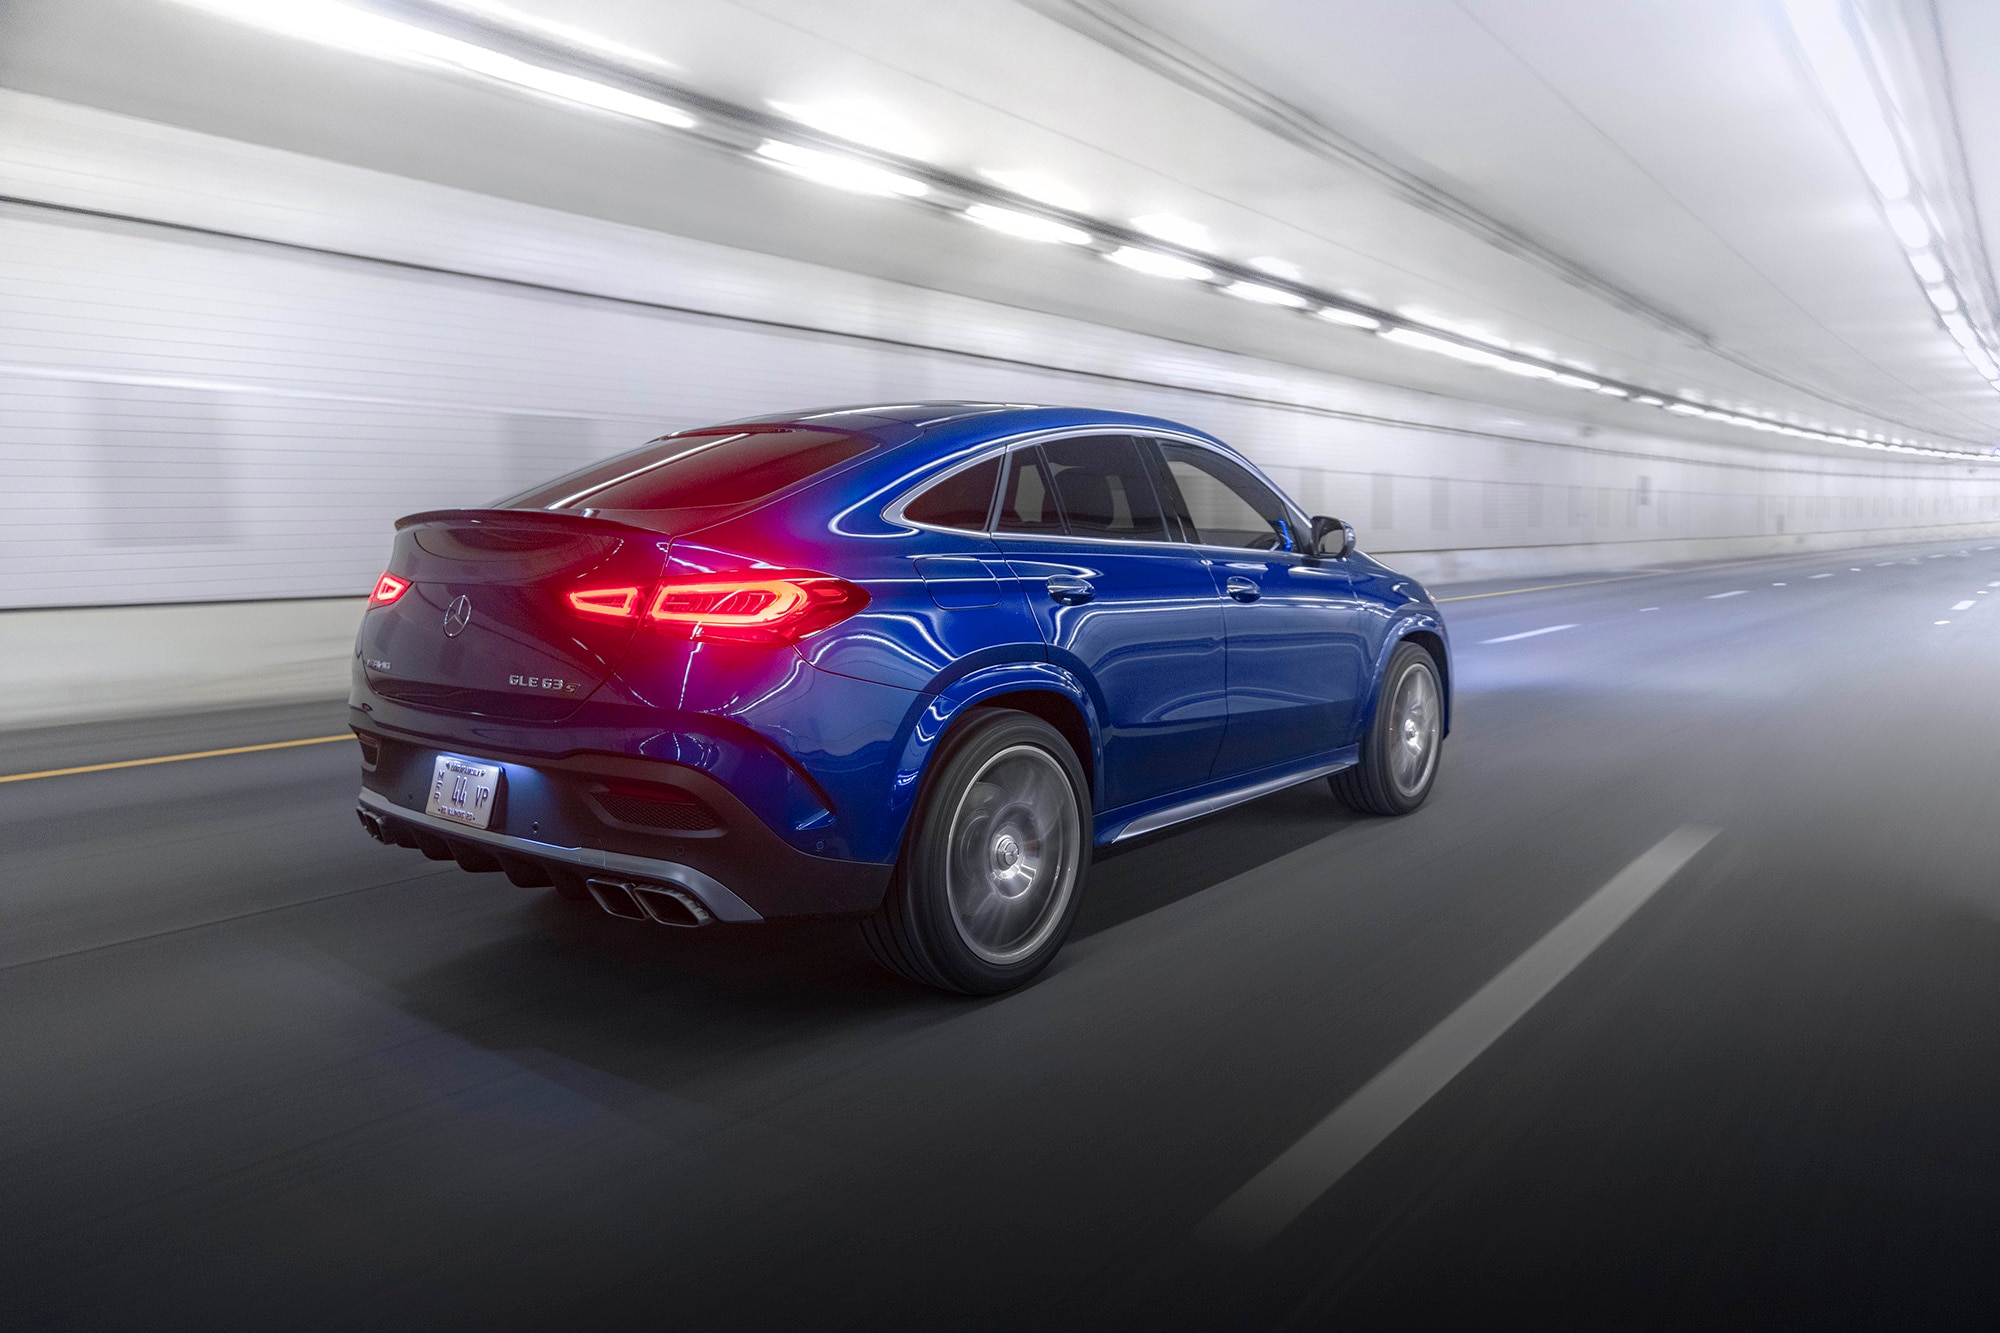 Mercedes-AMG GLE 63 S Coupe in blue, rear